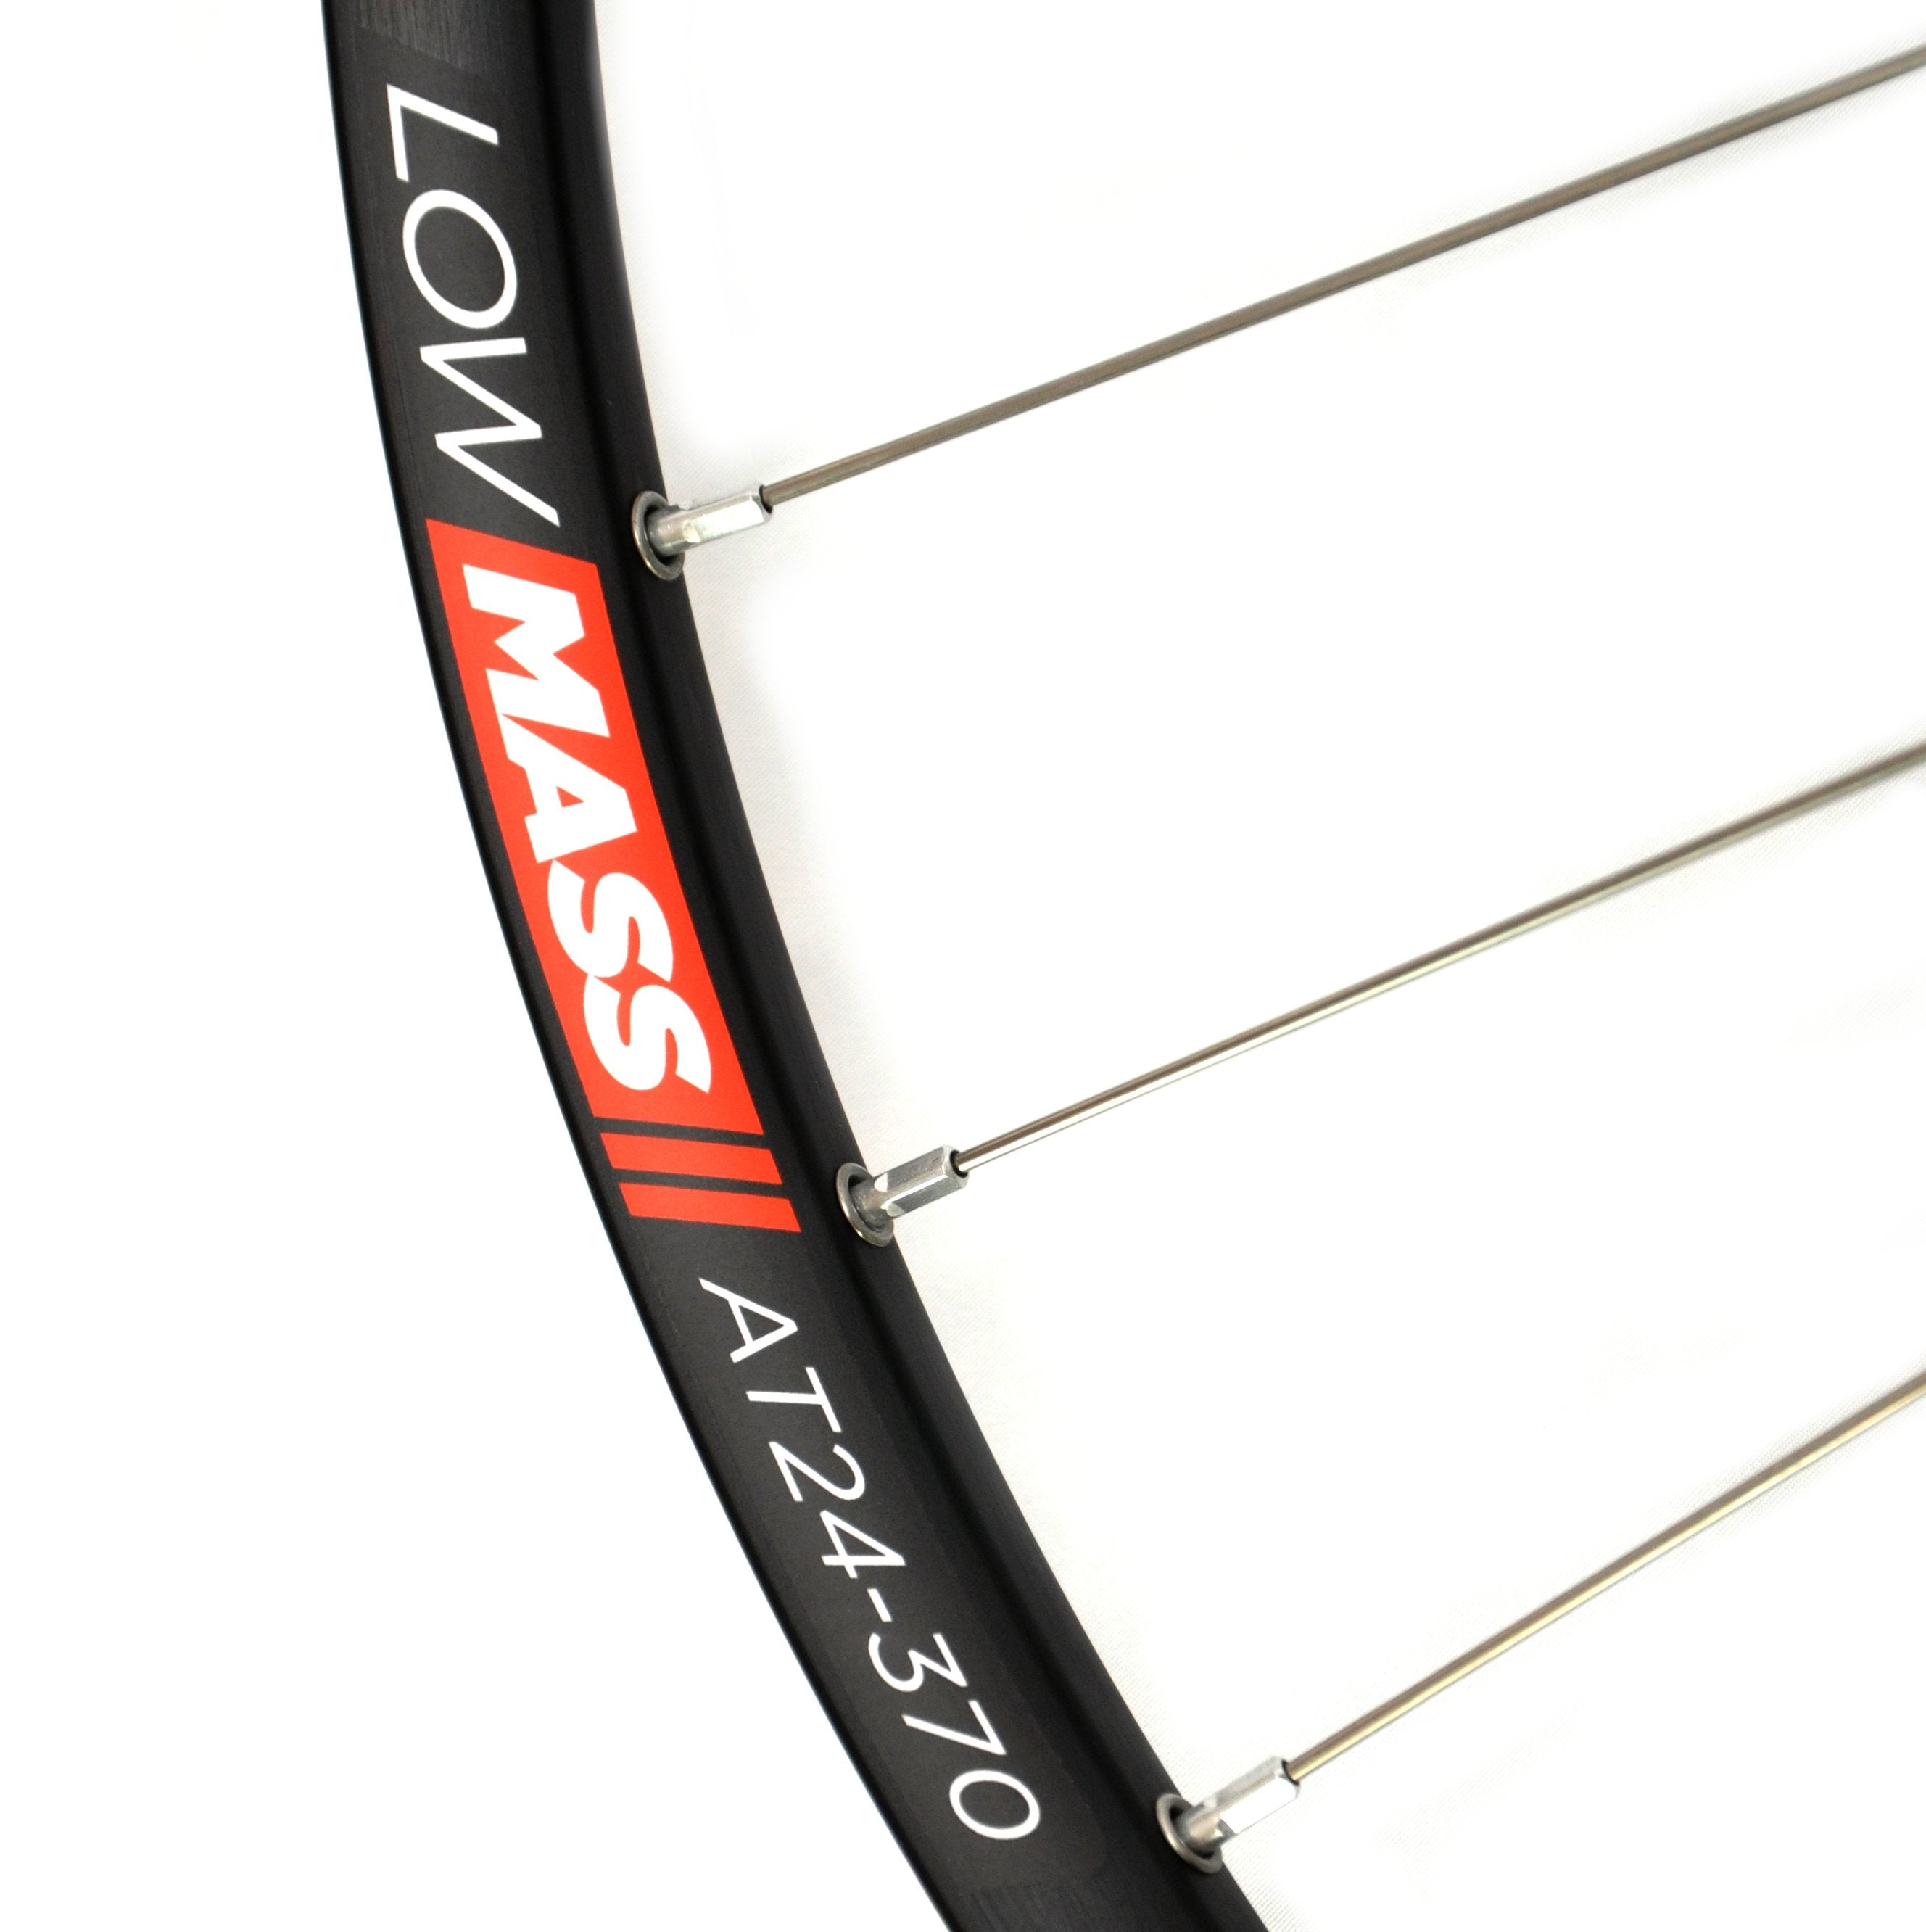 LOWMASS AT24-370 with SAPIM D-LIGHT SPOKES